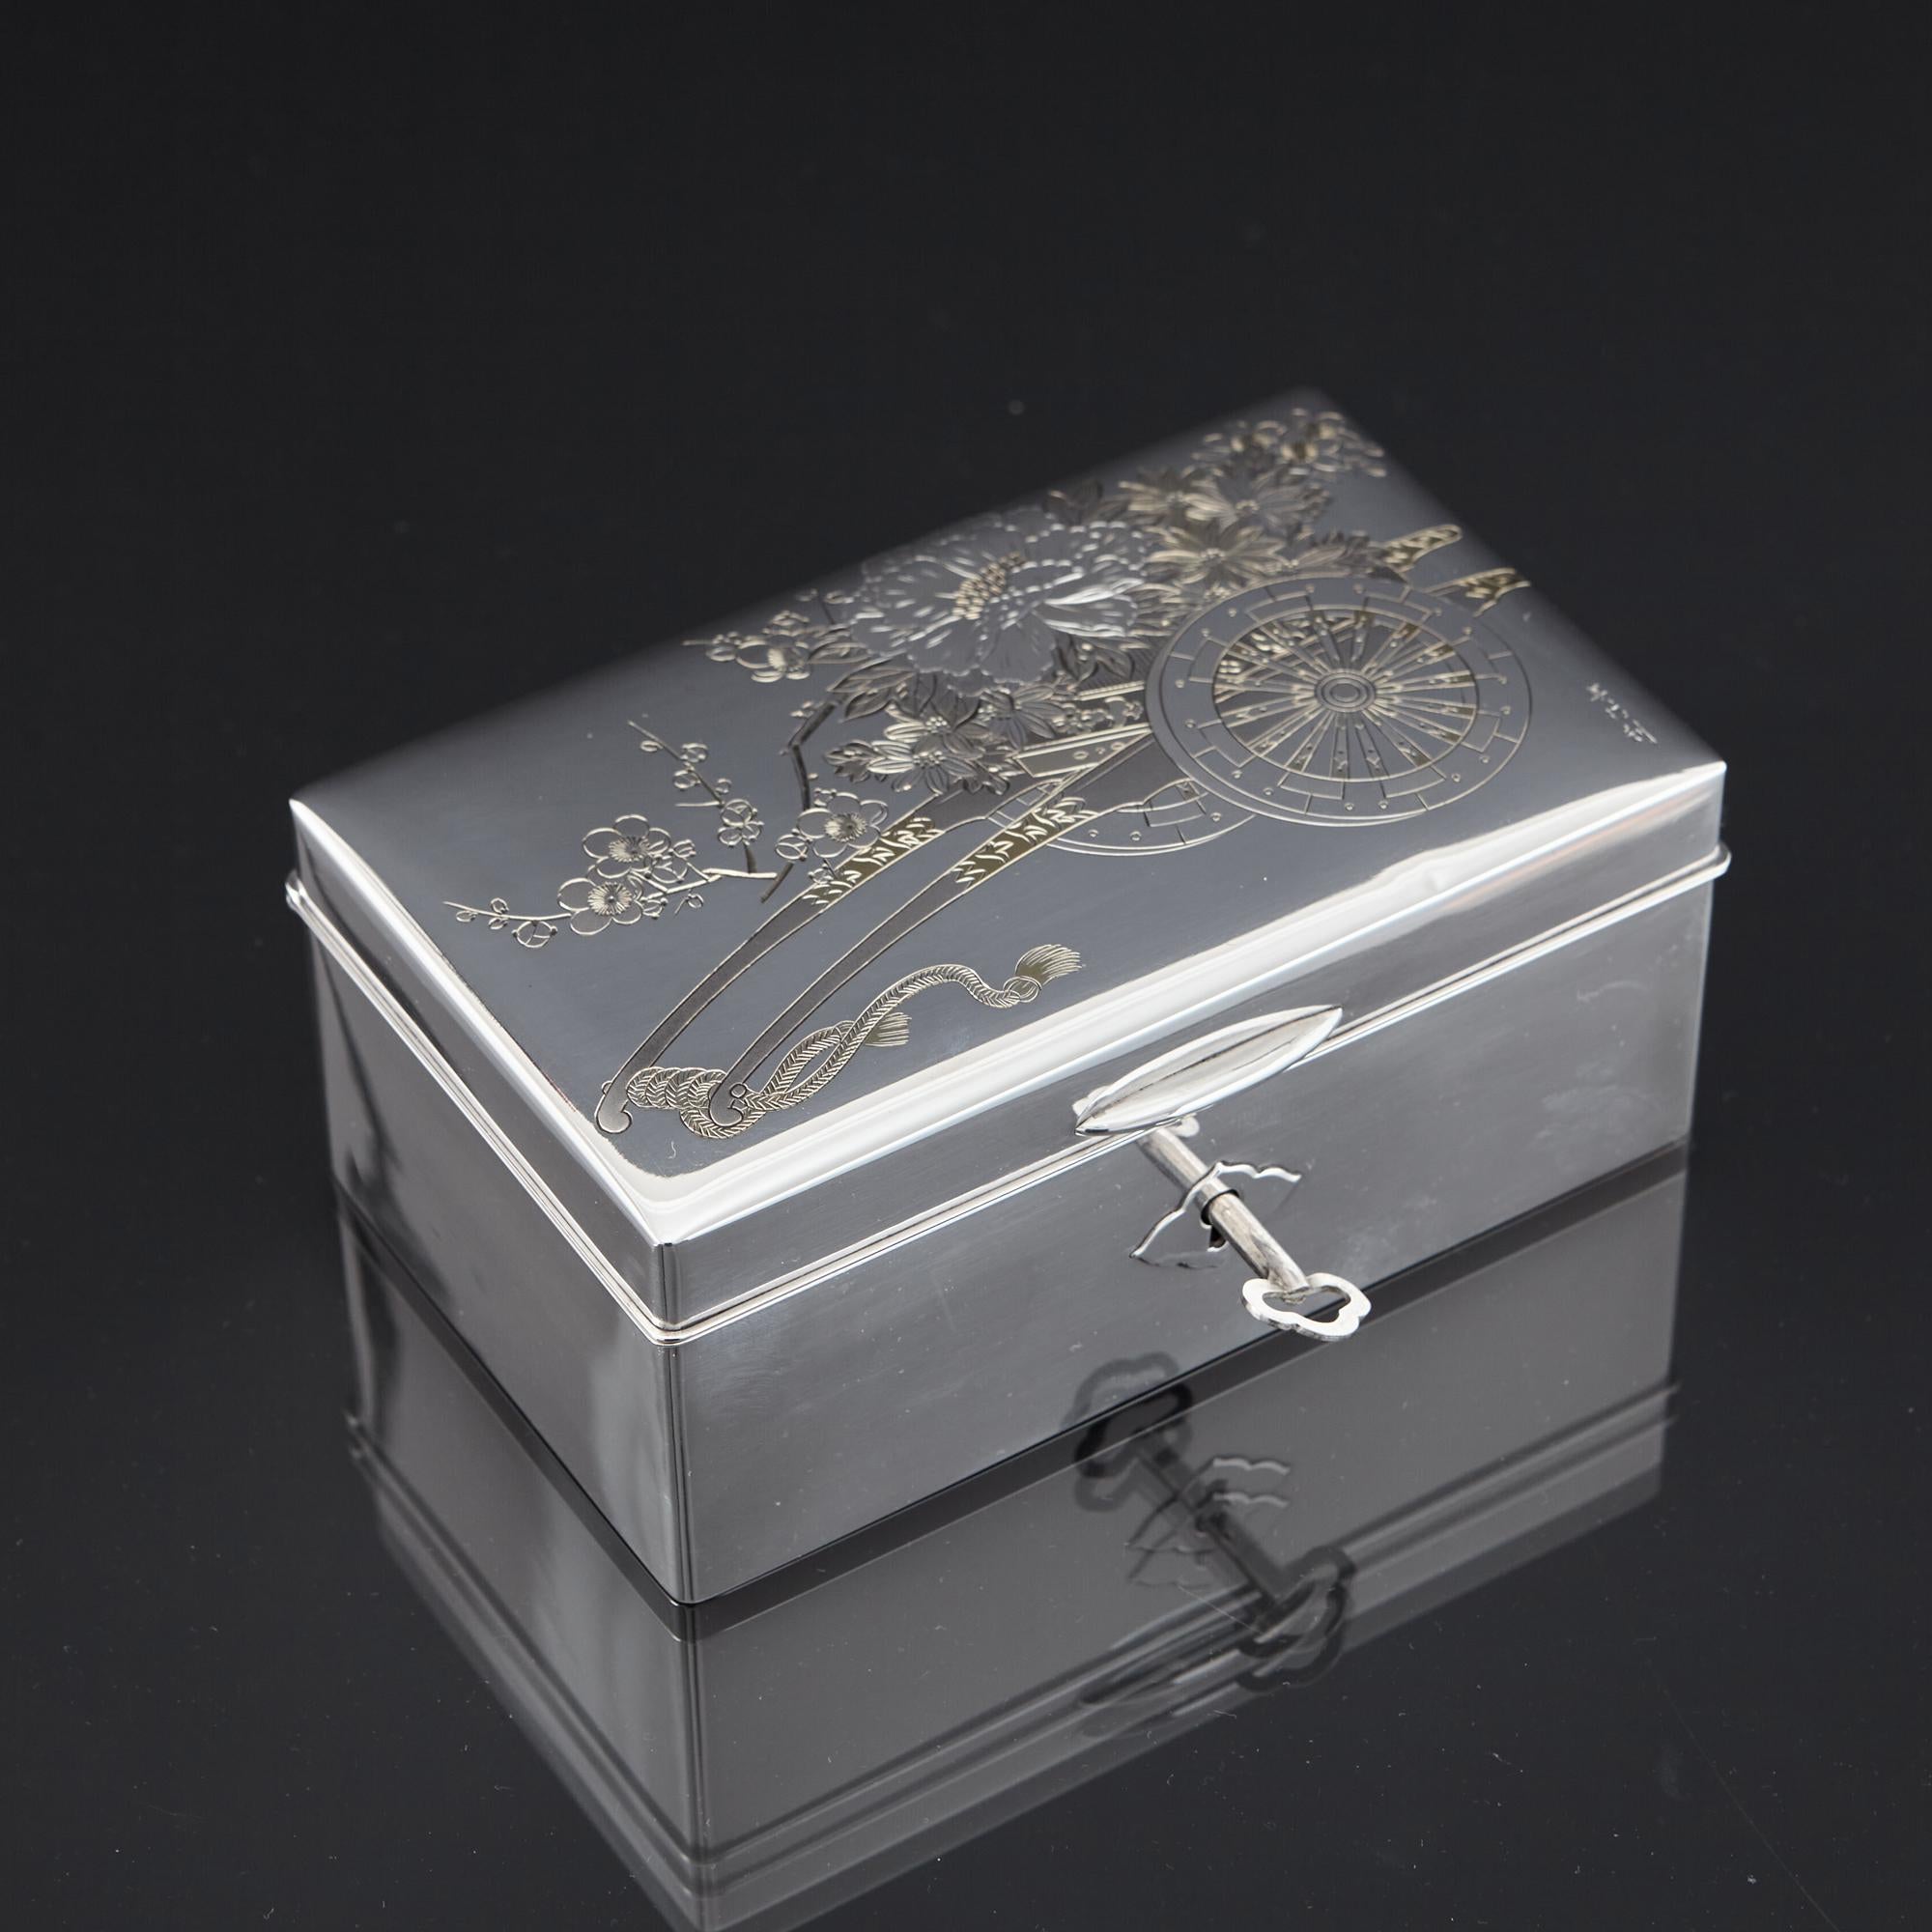 Charming first quality Japanese silver (950/1000) jewel box beautifully hand engraved with an image of a traditional wooden cart brimming with a profusion of chrysanthemums and cherry blossom - familiar Japanese artistic motifs - and delicately